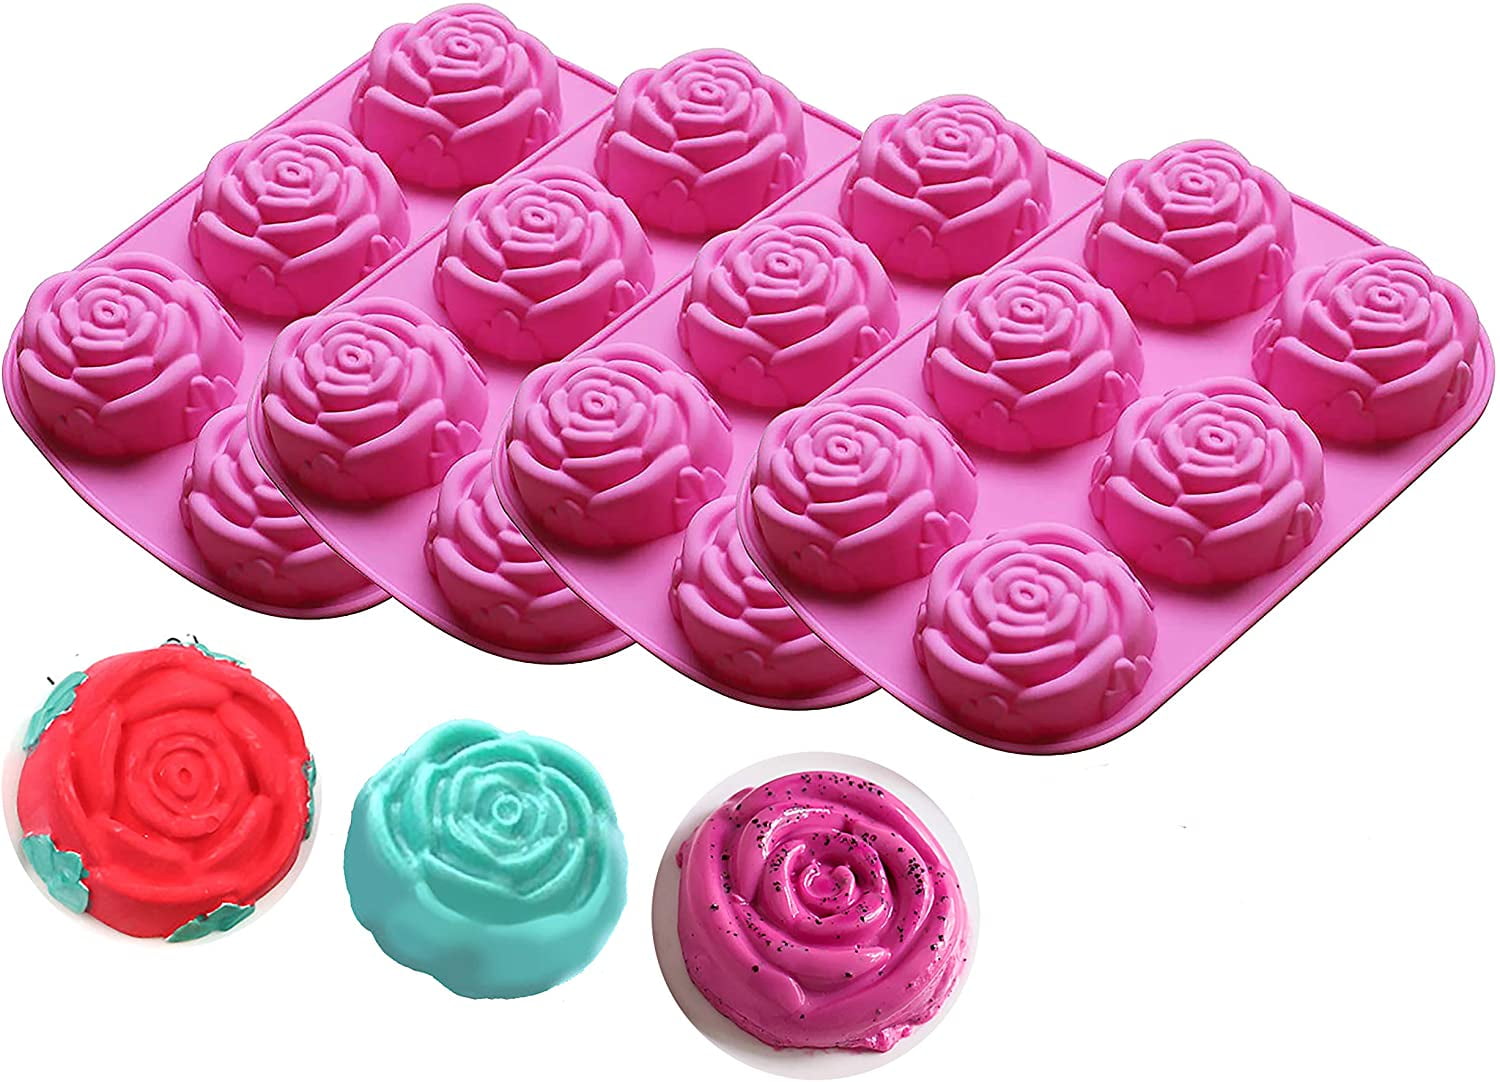 6 Rose Flower Cake Mold Soap Mold Candy Chocolate Baking Mould Silicone Tool Hot 